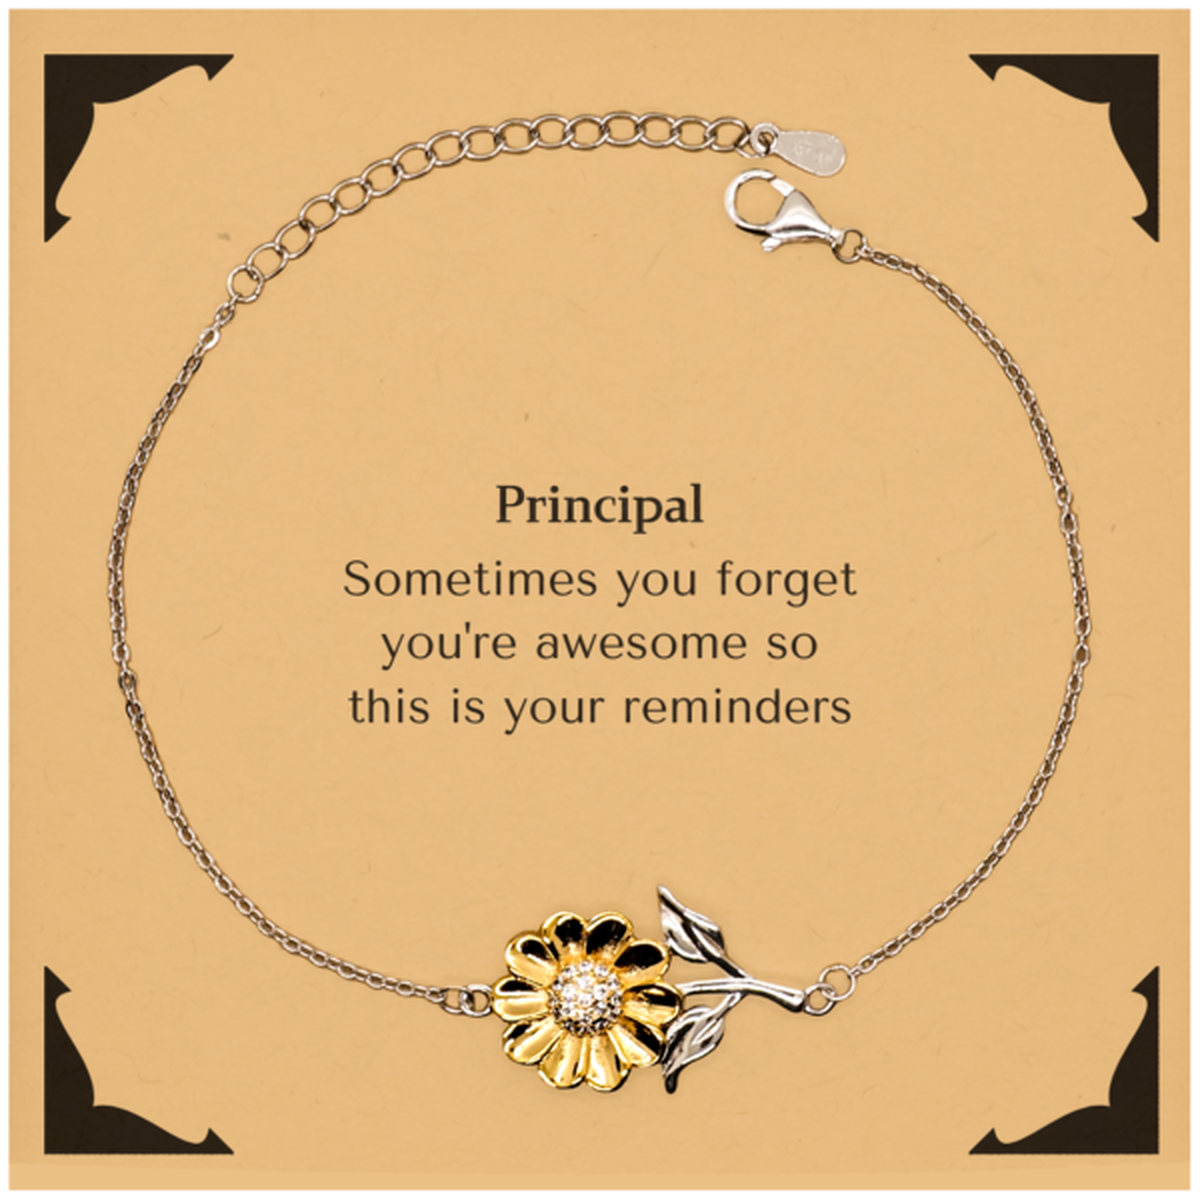 Sentimental Principal Sunflower Bracelet, Principal Sometimes you forget you're awesome so this is your reminders, Graduation Christmas Birthday Gifts for Principal, Men, Women, Coworkers